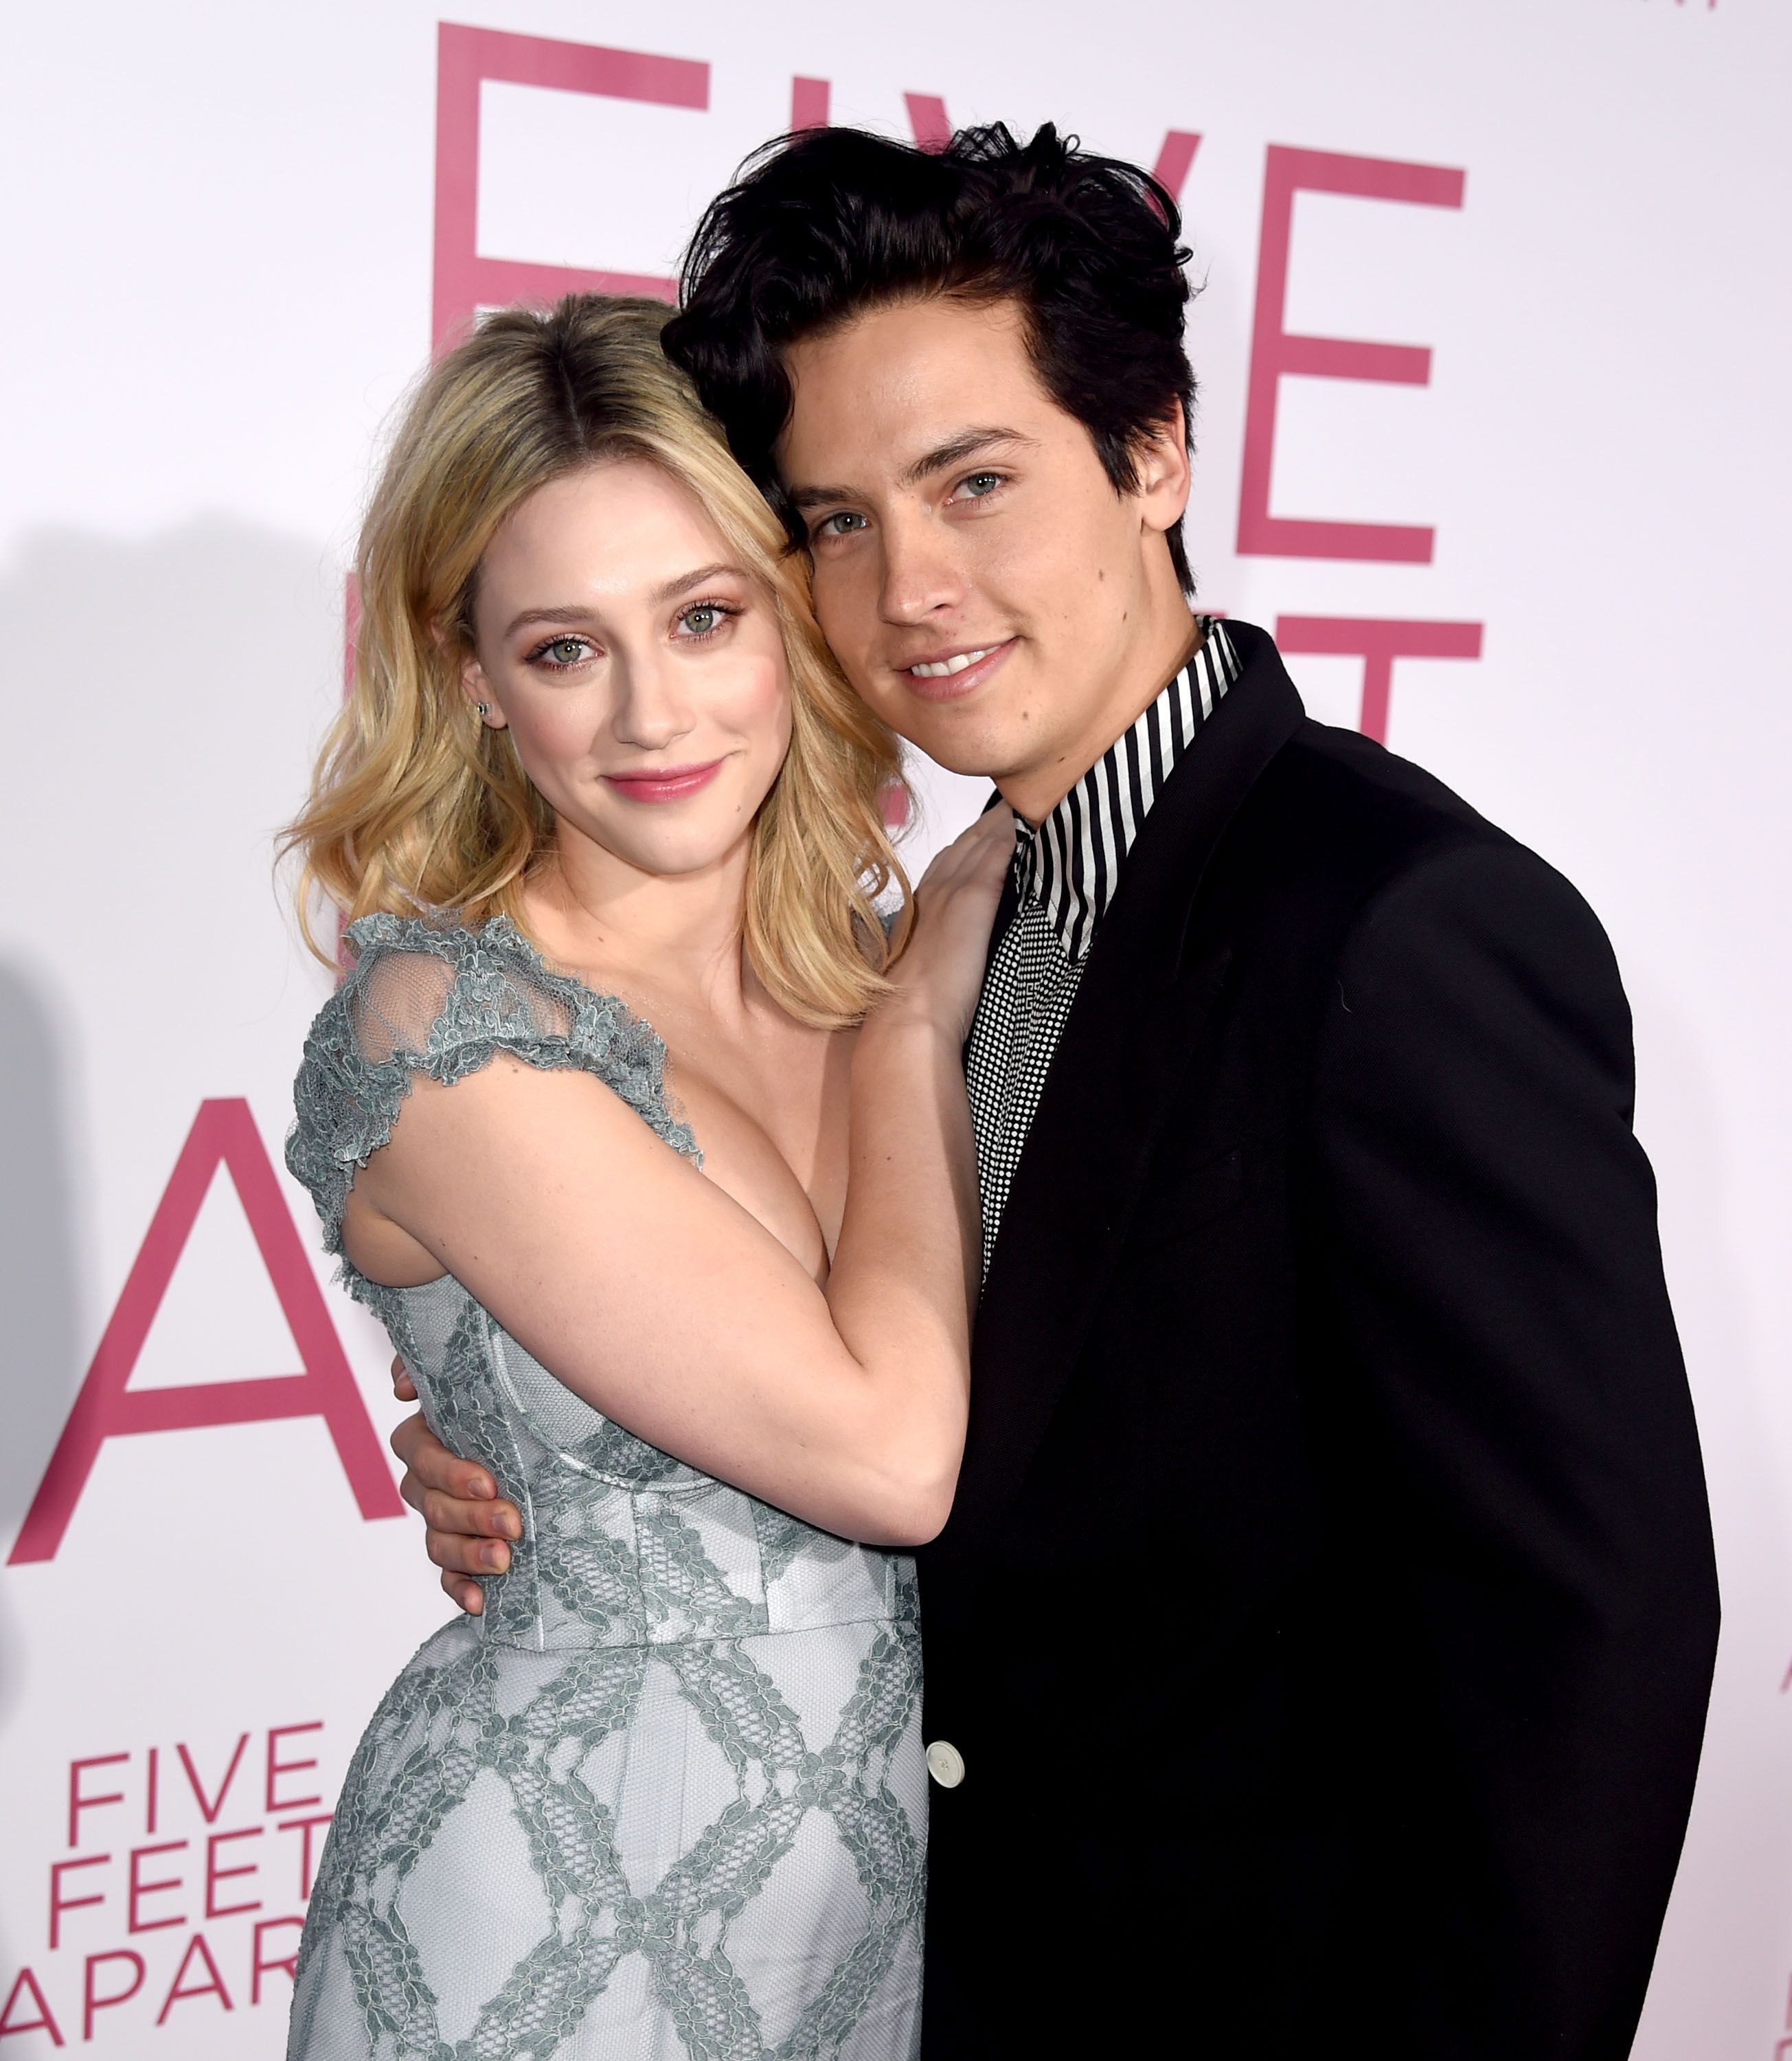 Lili Reinhart and Cole Sprouse at the premiere of "Five Feet Apart" in 2019 in Los Angeles, California | Source: Getty Images